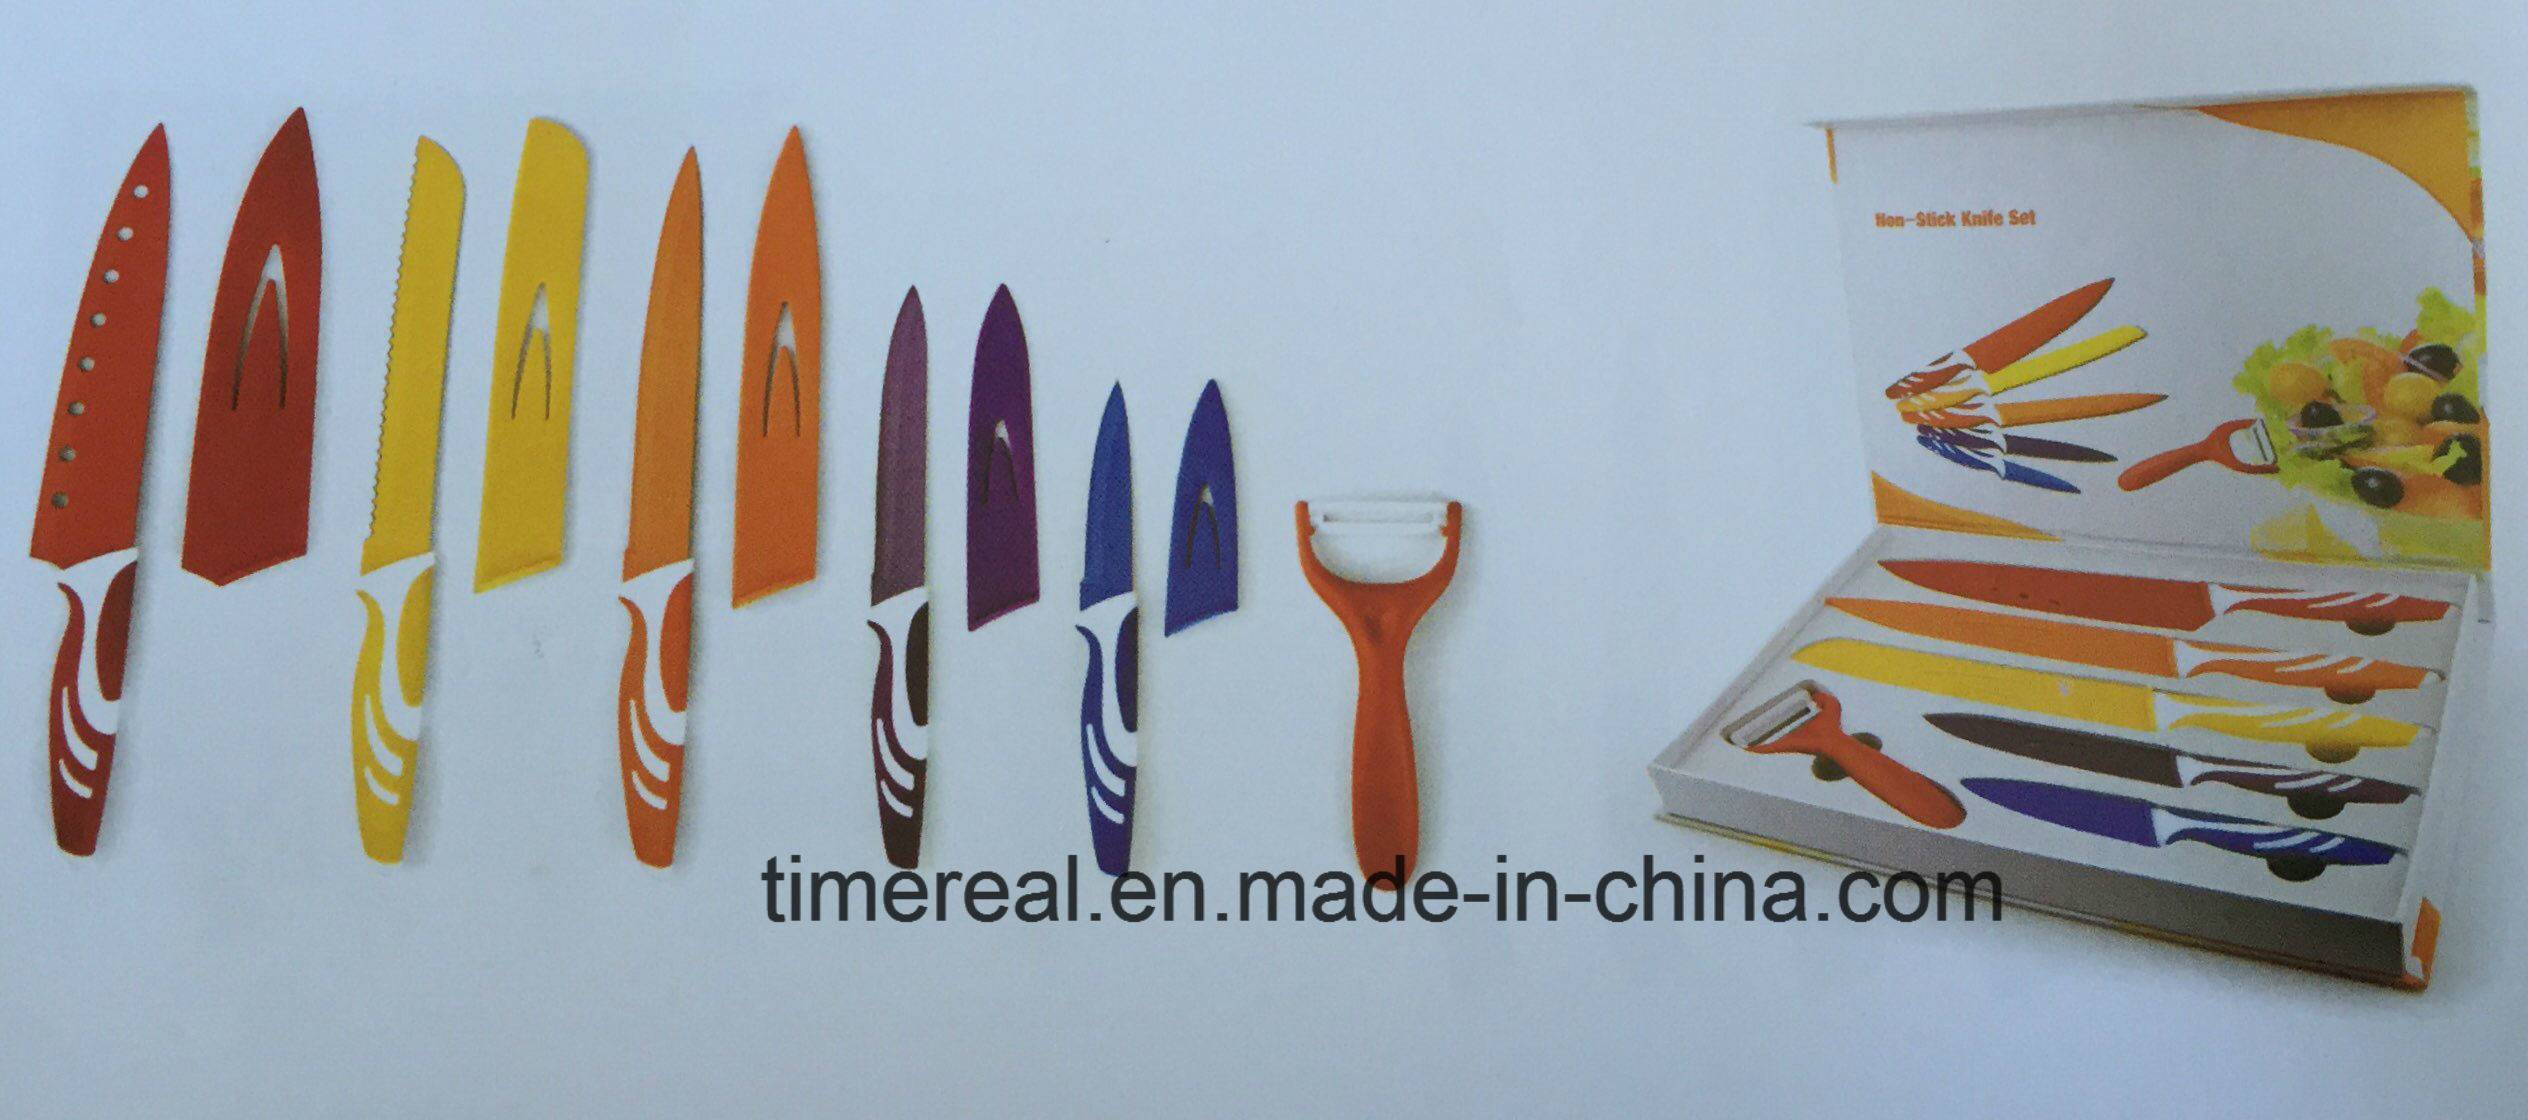 Wholesale Price China Portable Plastic Manual Orange Juicer -
 Stainless Steel Kitchen Knives Set with Painting No. Fj-008 – Long Prosper